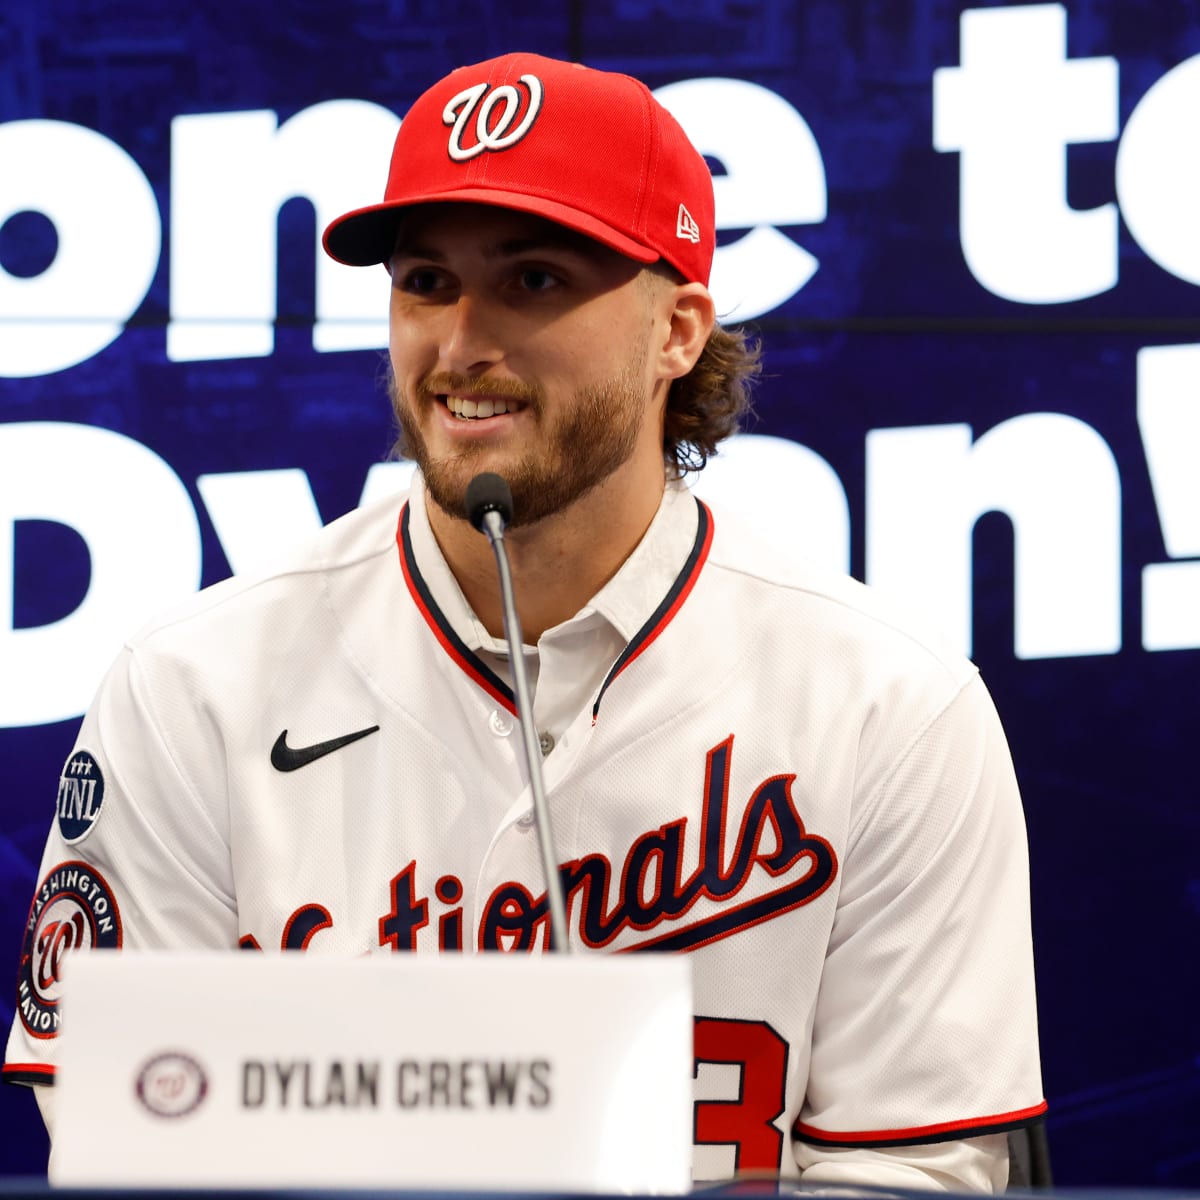 LSU Baseball: Dylan Crews introduced by Nationals